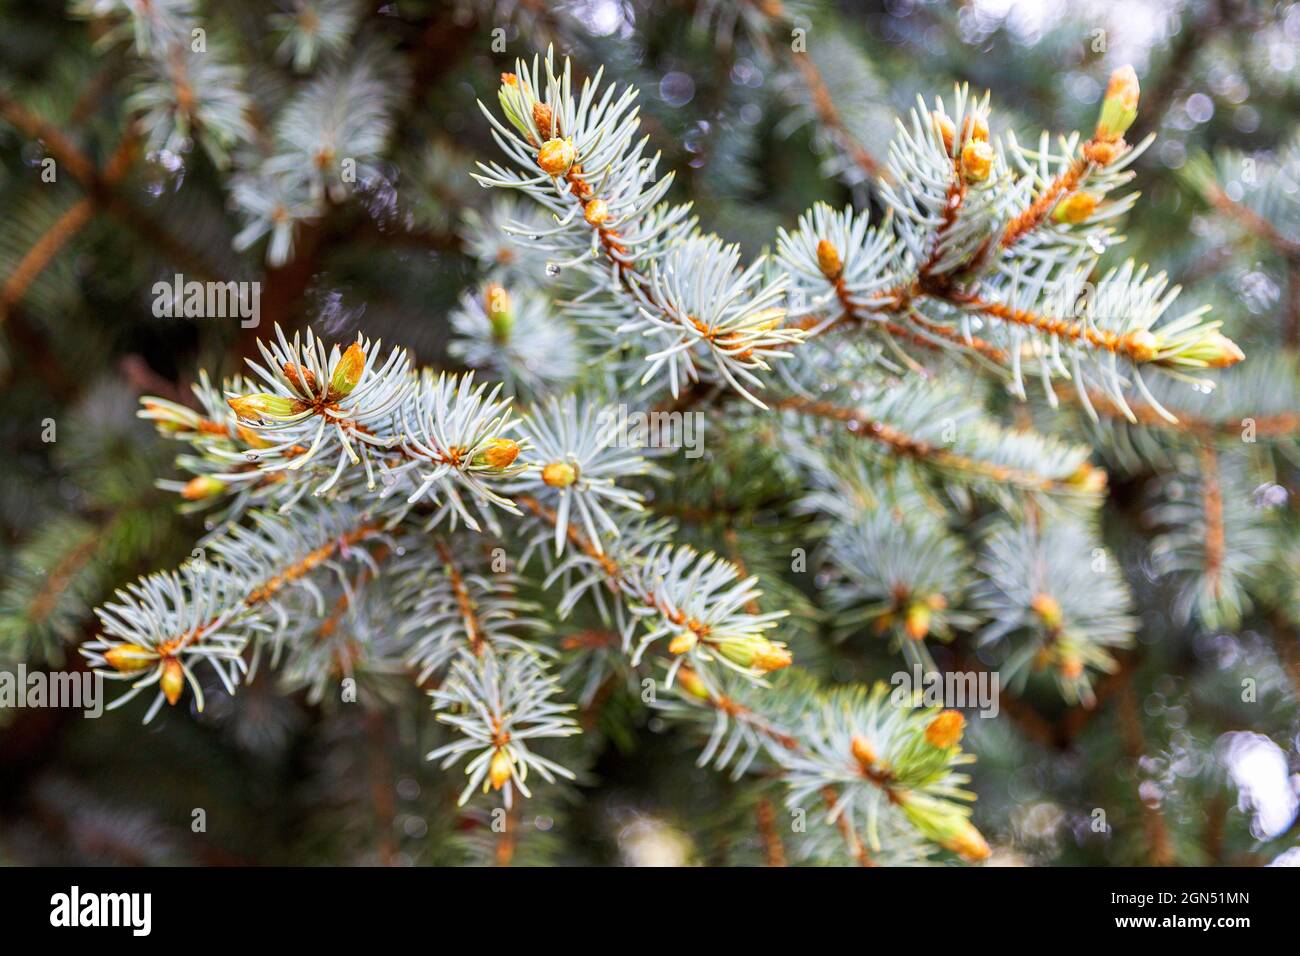 Blue Spruce with New Spring Growth and Rain Drops Background. Rain drops on Colorado blue spruce branches close up with blurry background Stock Photo